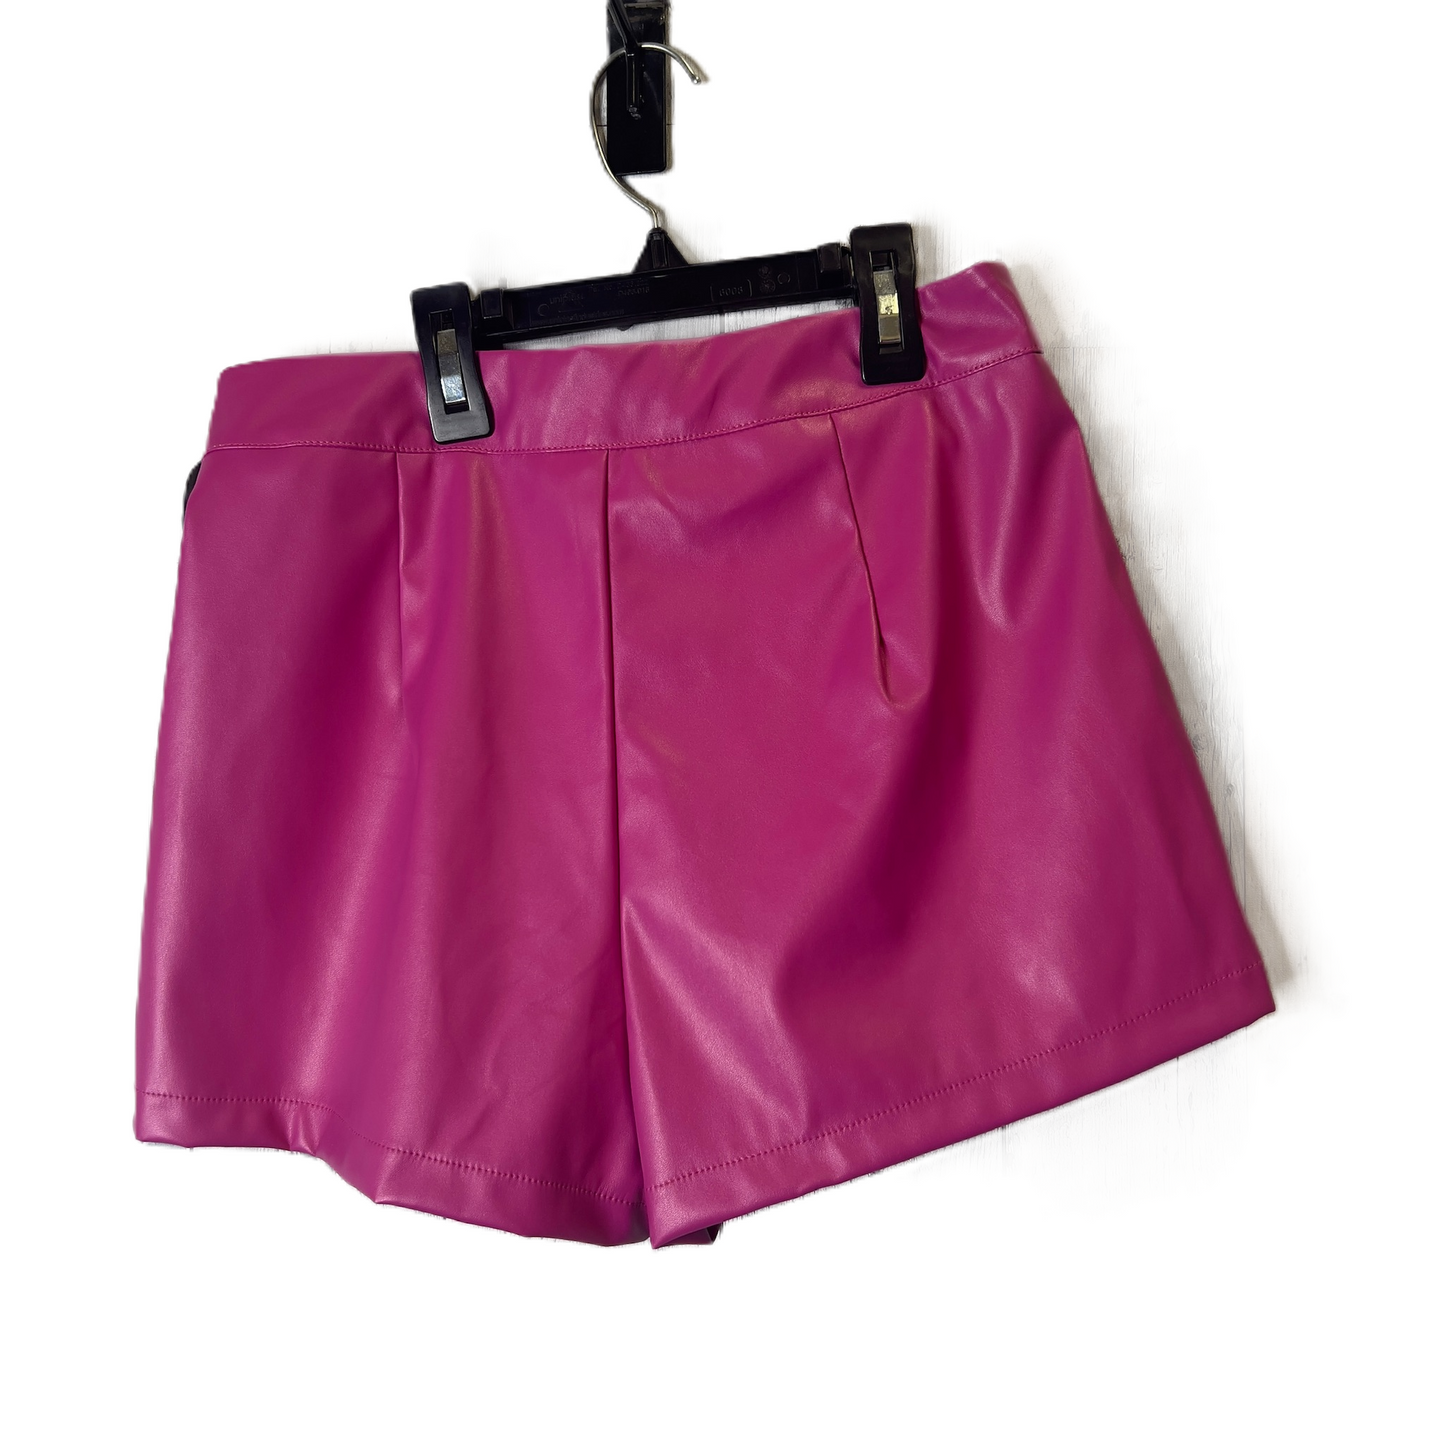 Pink Shorts By Shein, Size: S